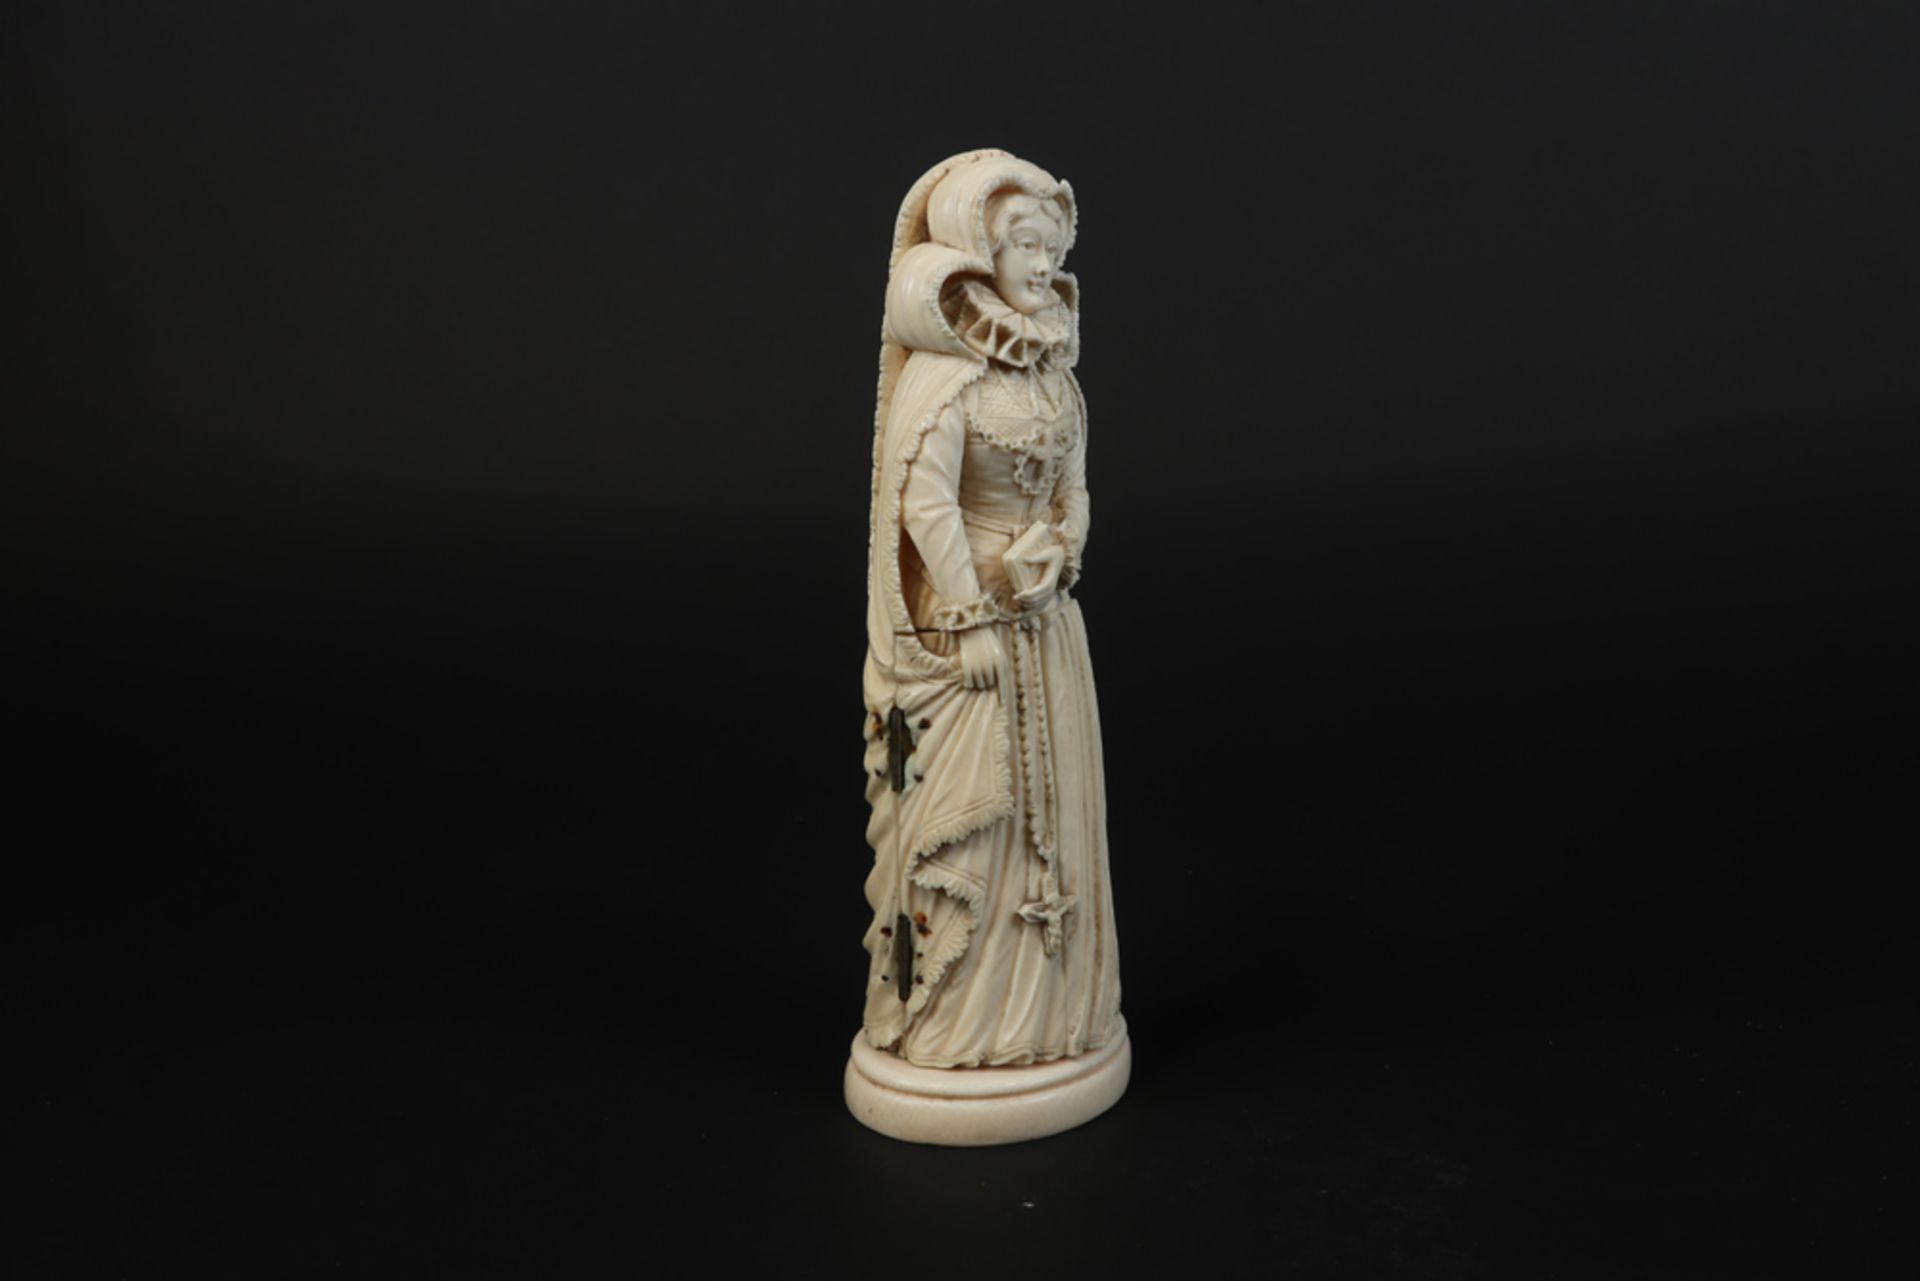 19th Cent European, presumably German, sculpture in ivory depicting Mary Stuart (queen of Scots) , - Image 3 of 8